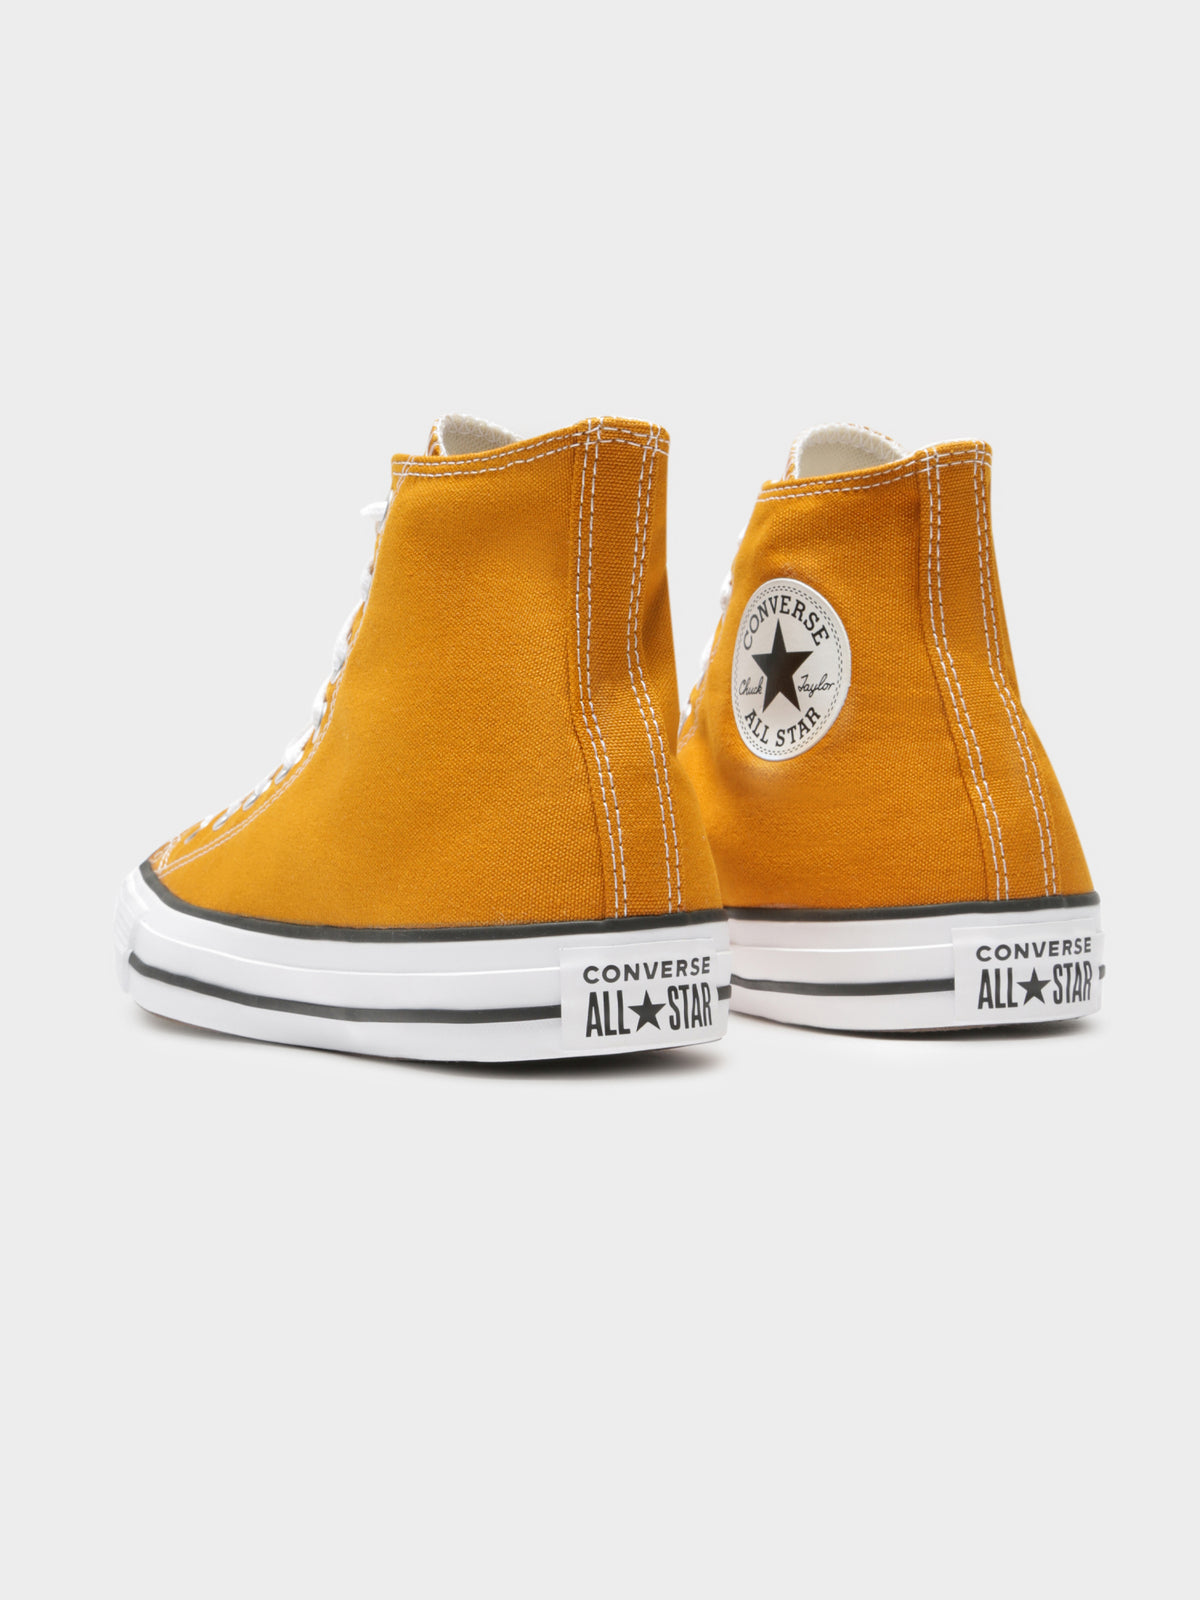 Unisex Chuck Taylor High Top Sneakers in Staffron Yellow